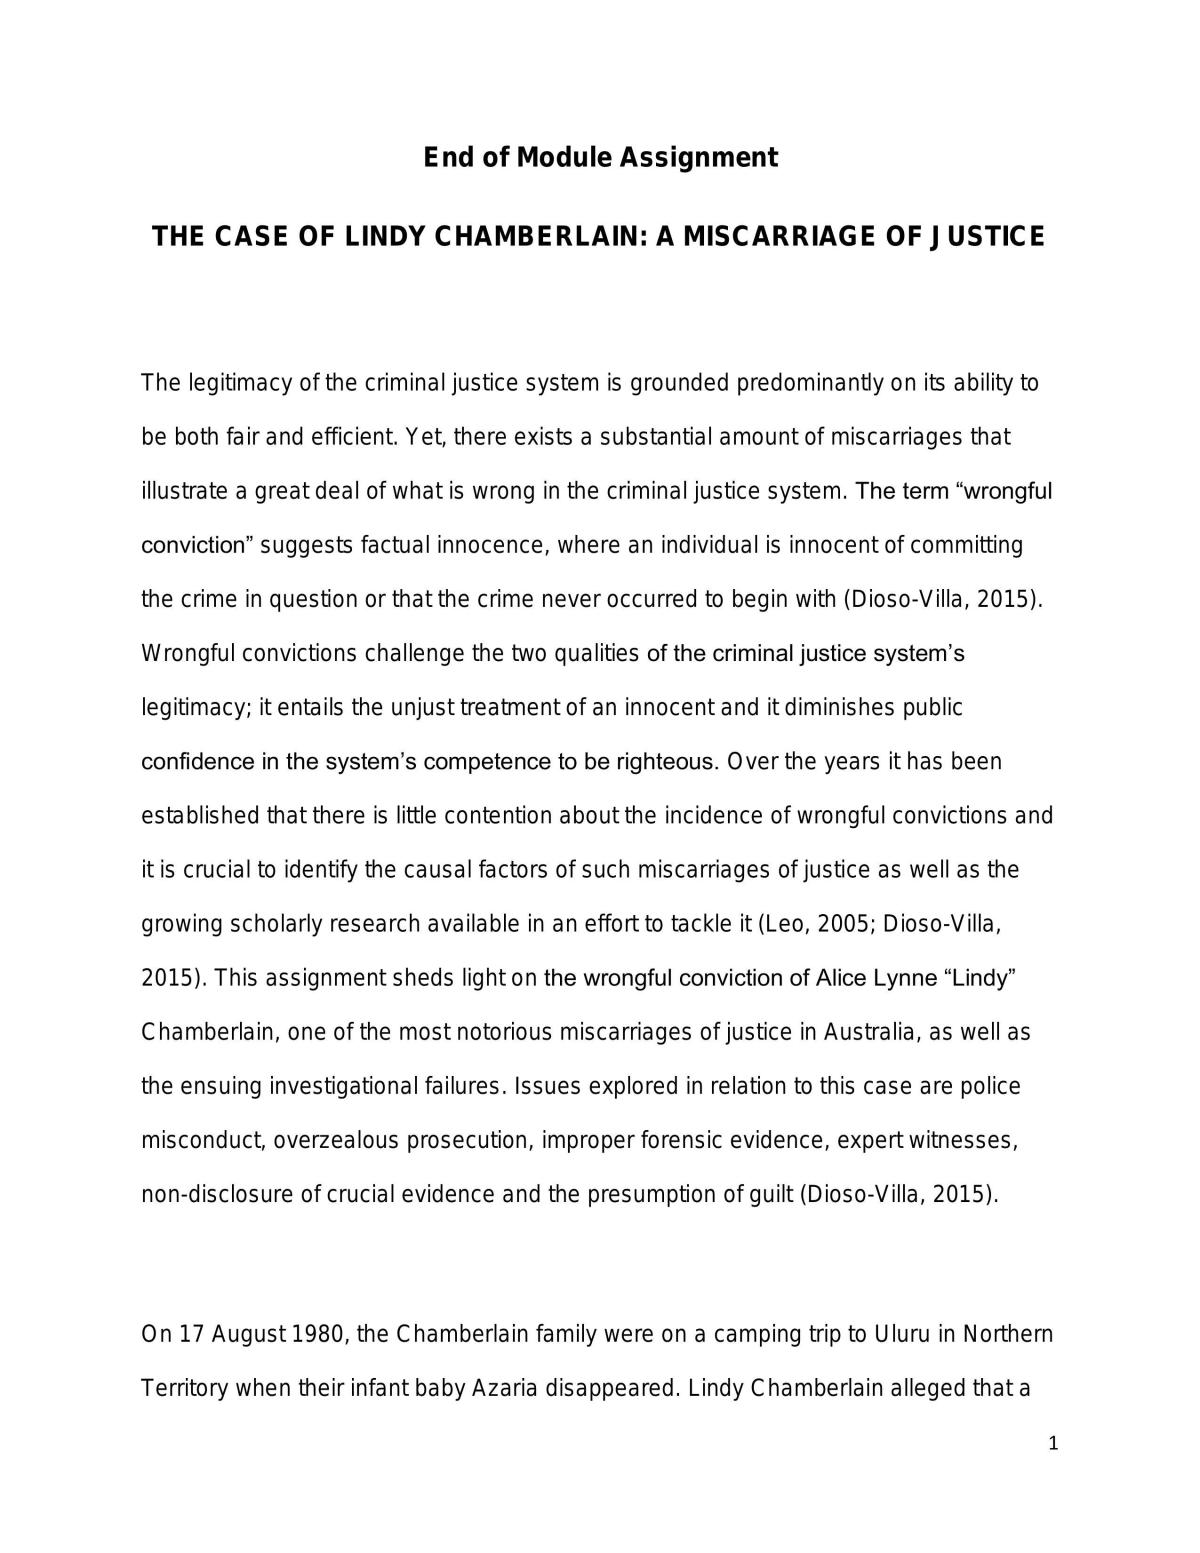 what is miscarriage of justice essay